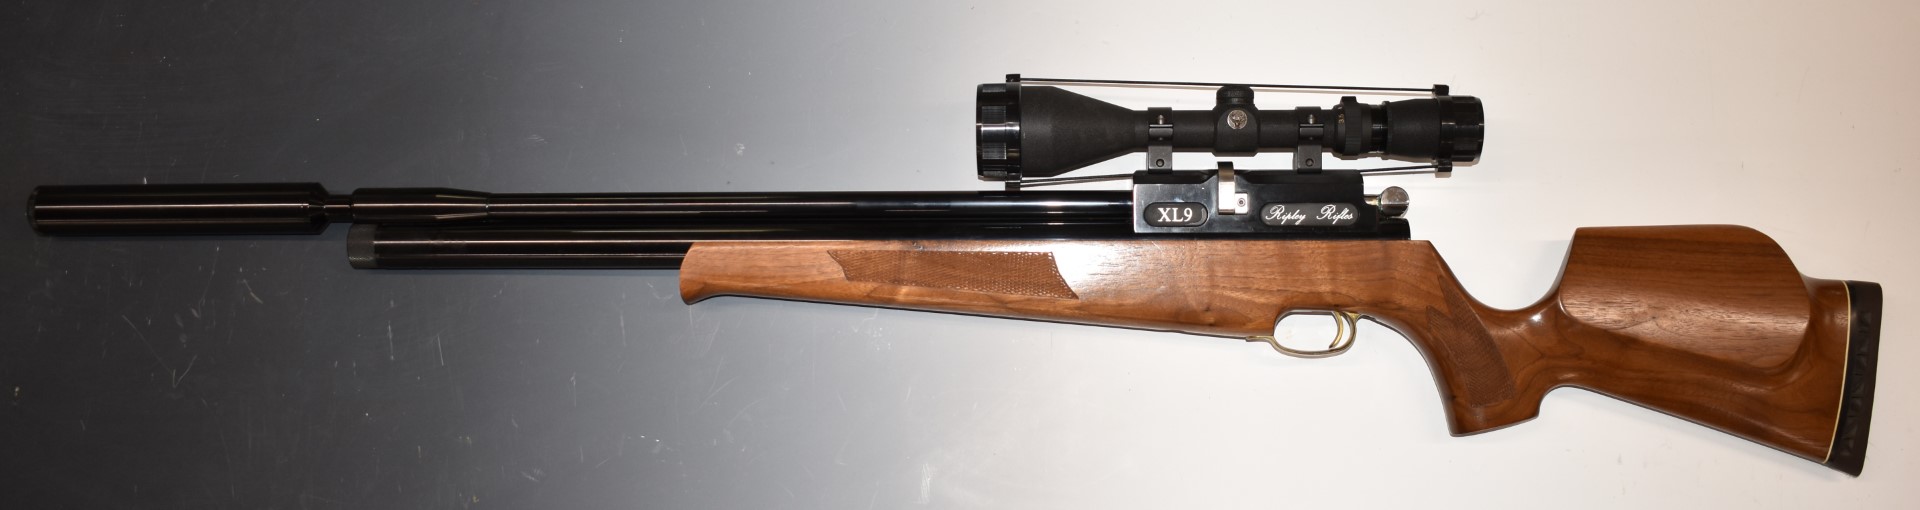 Ripley Rifles XL9 .22 PCP air rifle with nine shot magazine, chequered semi-pistol grip and - Image 7 of 10